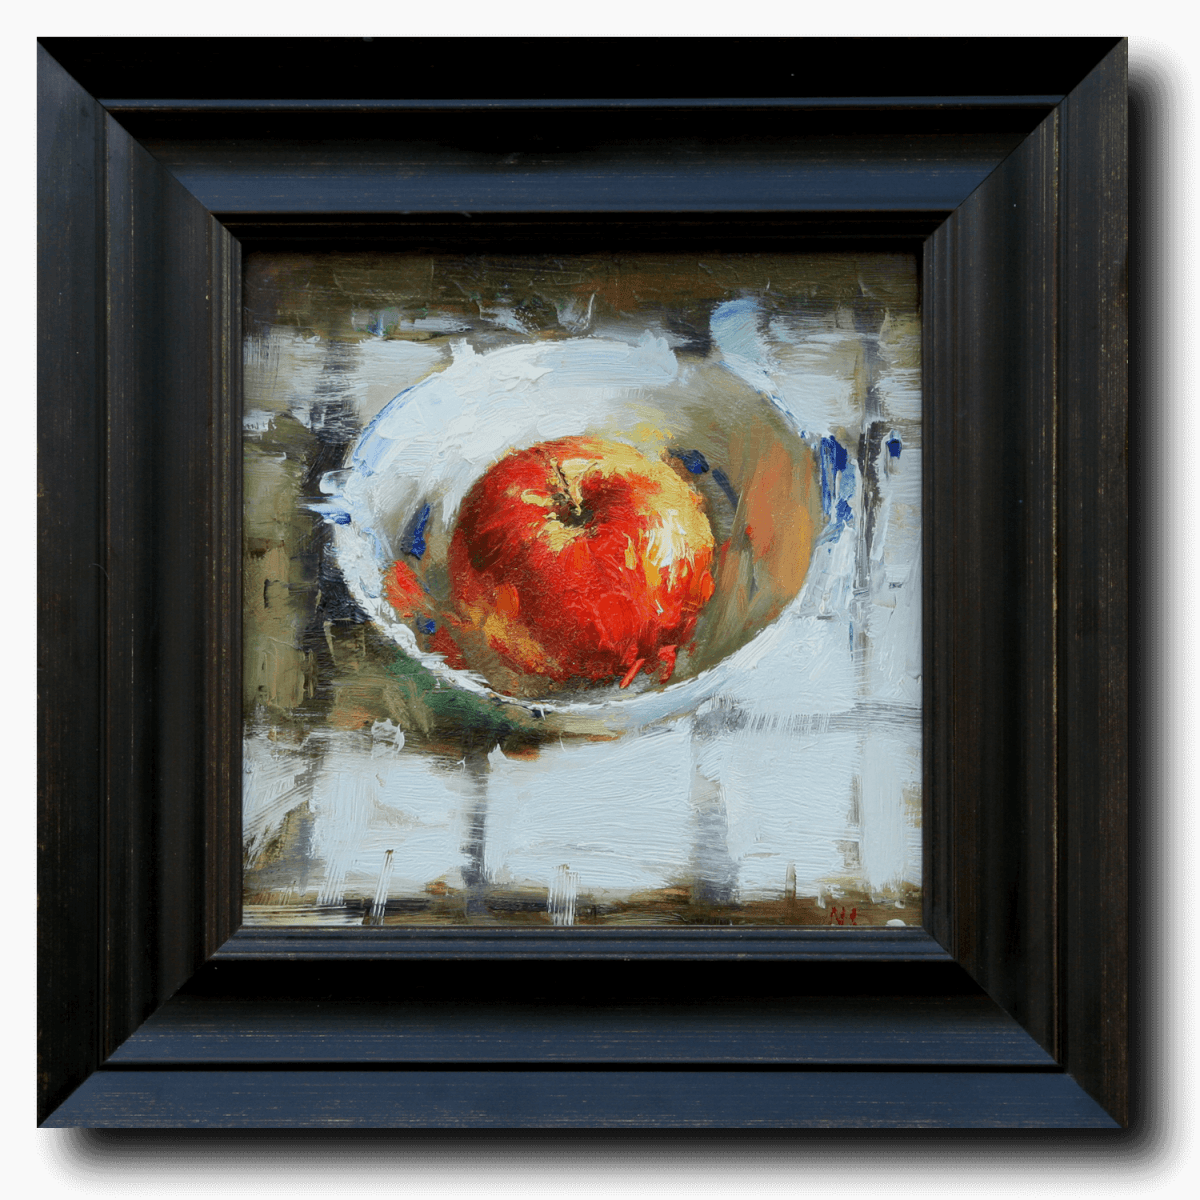 Apple in Bowl by Ning Lee at LePrince Galleries